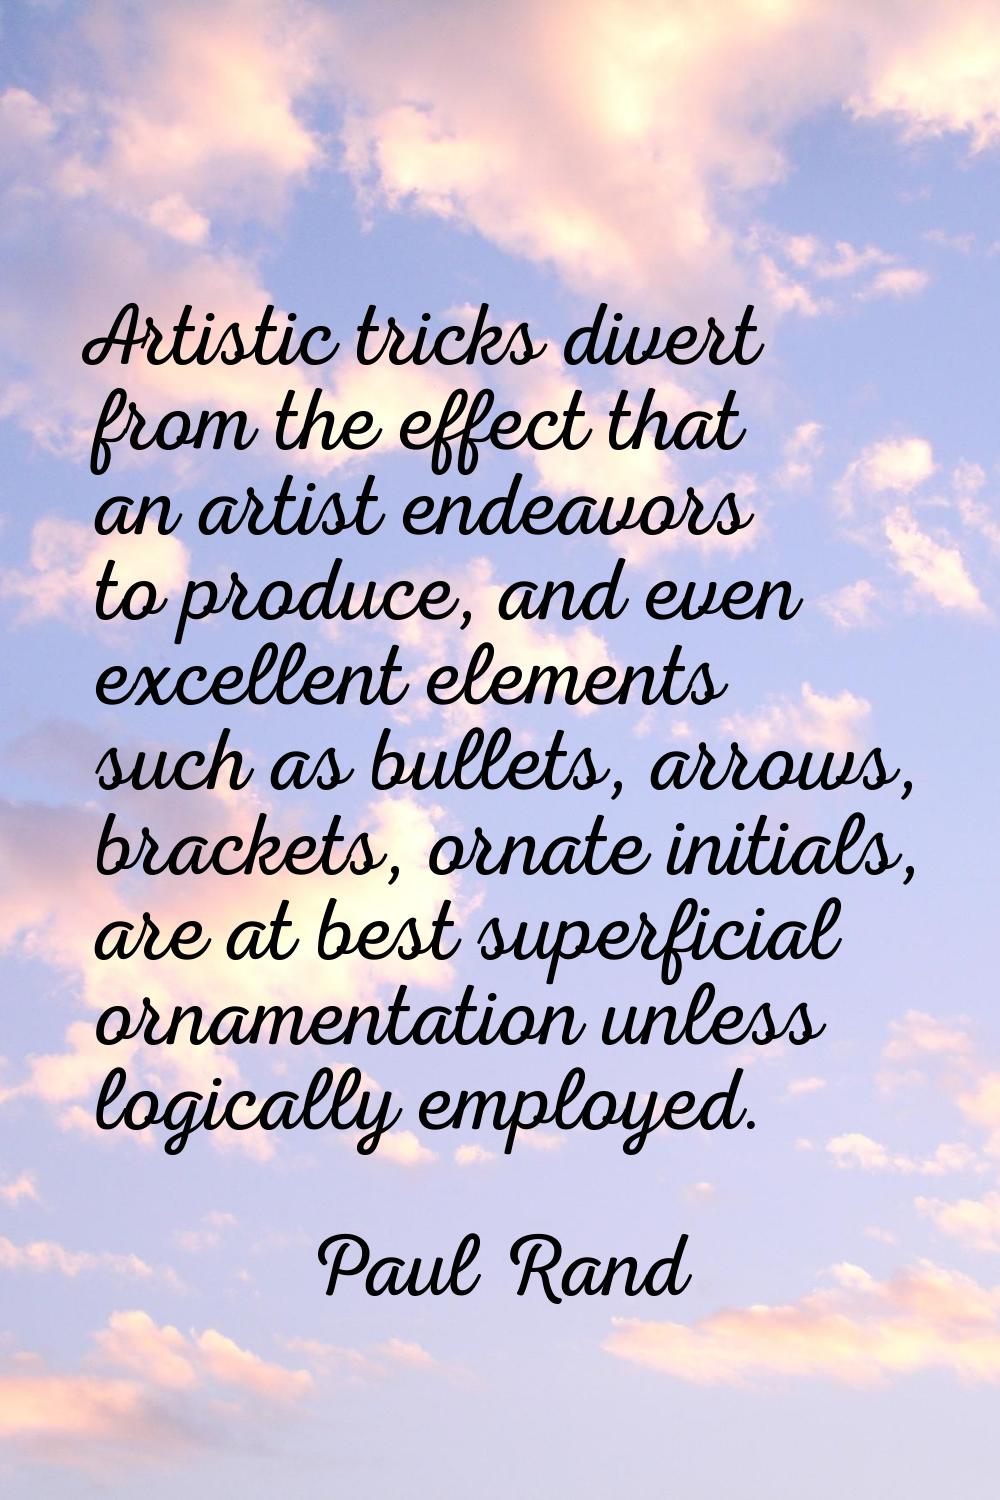 Artistic tricks divert from the effect that an artist endeavors to produce, and even excellent elem